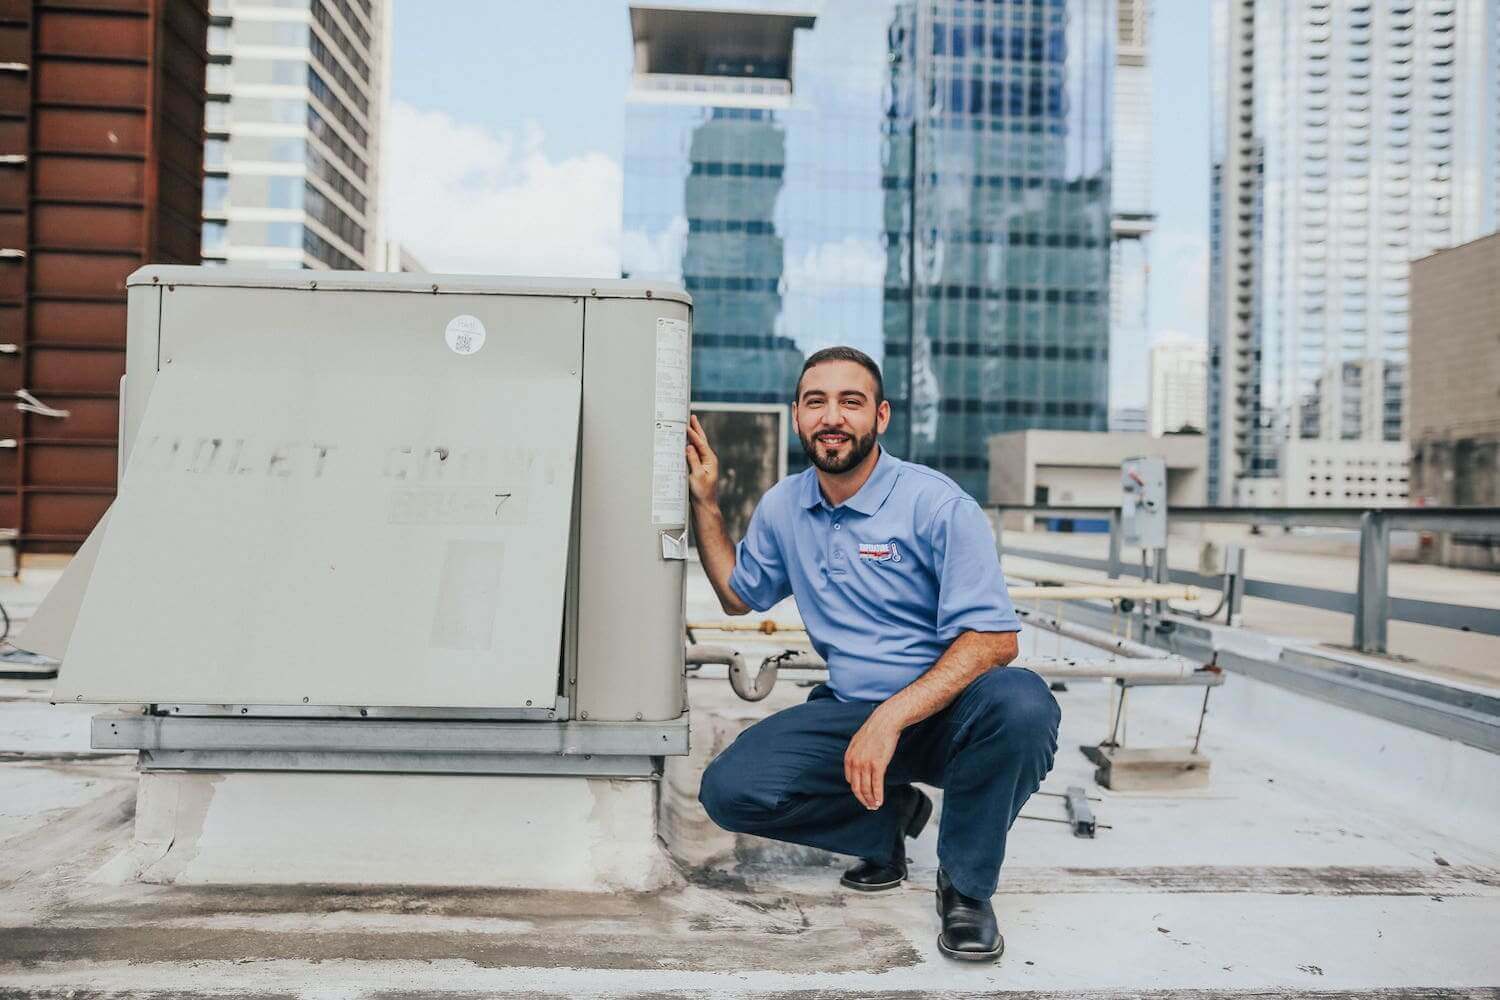 technician smiling next to rooftop unit